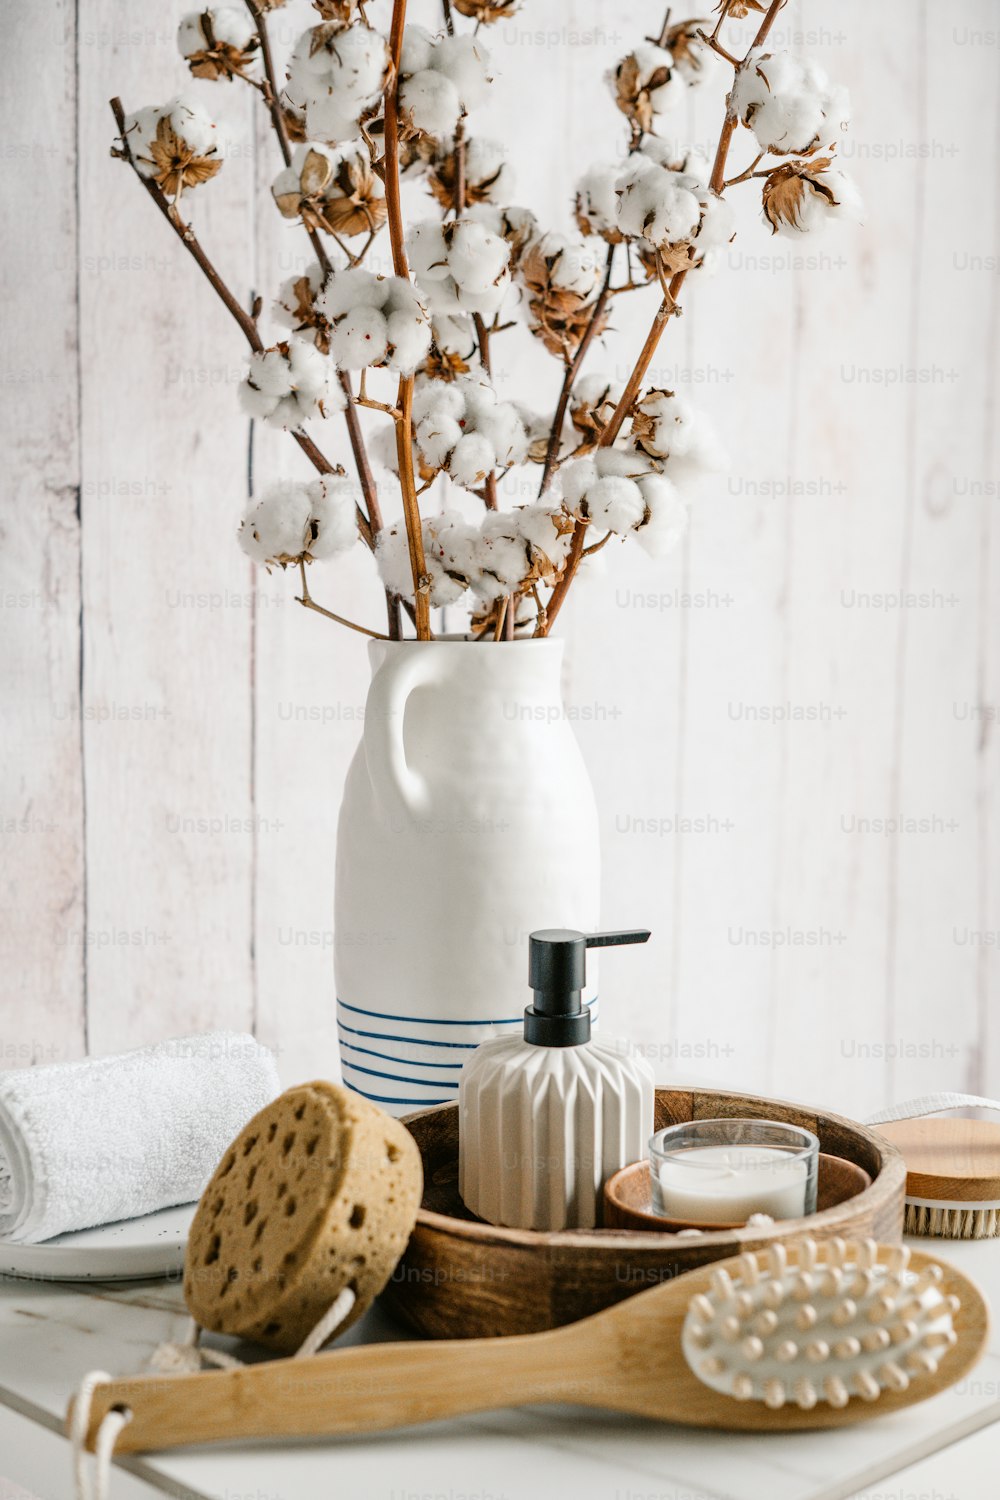 a white vase filled with cotton flowers next to a wooden brush